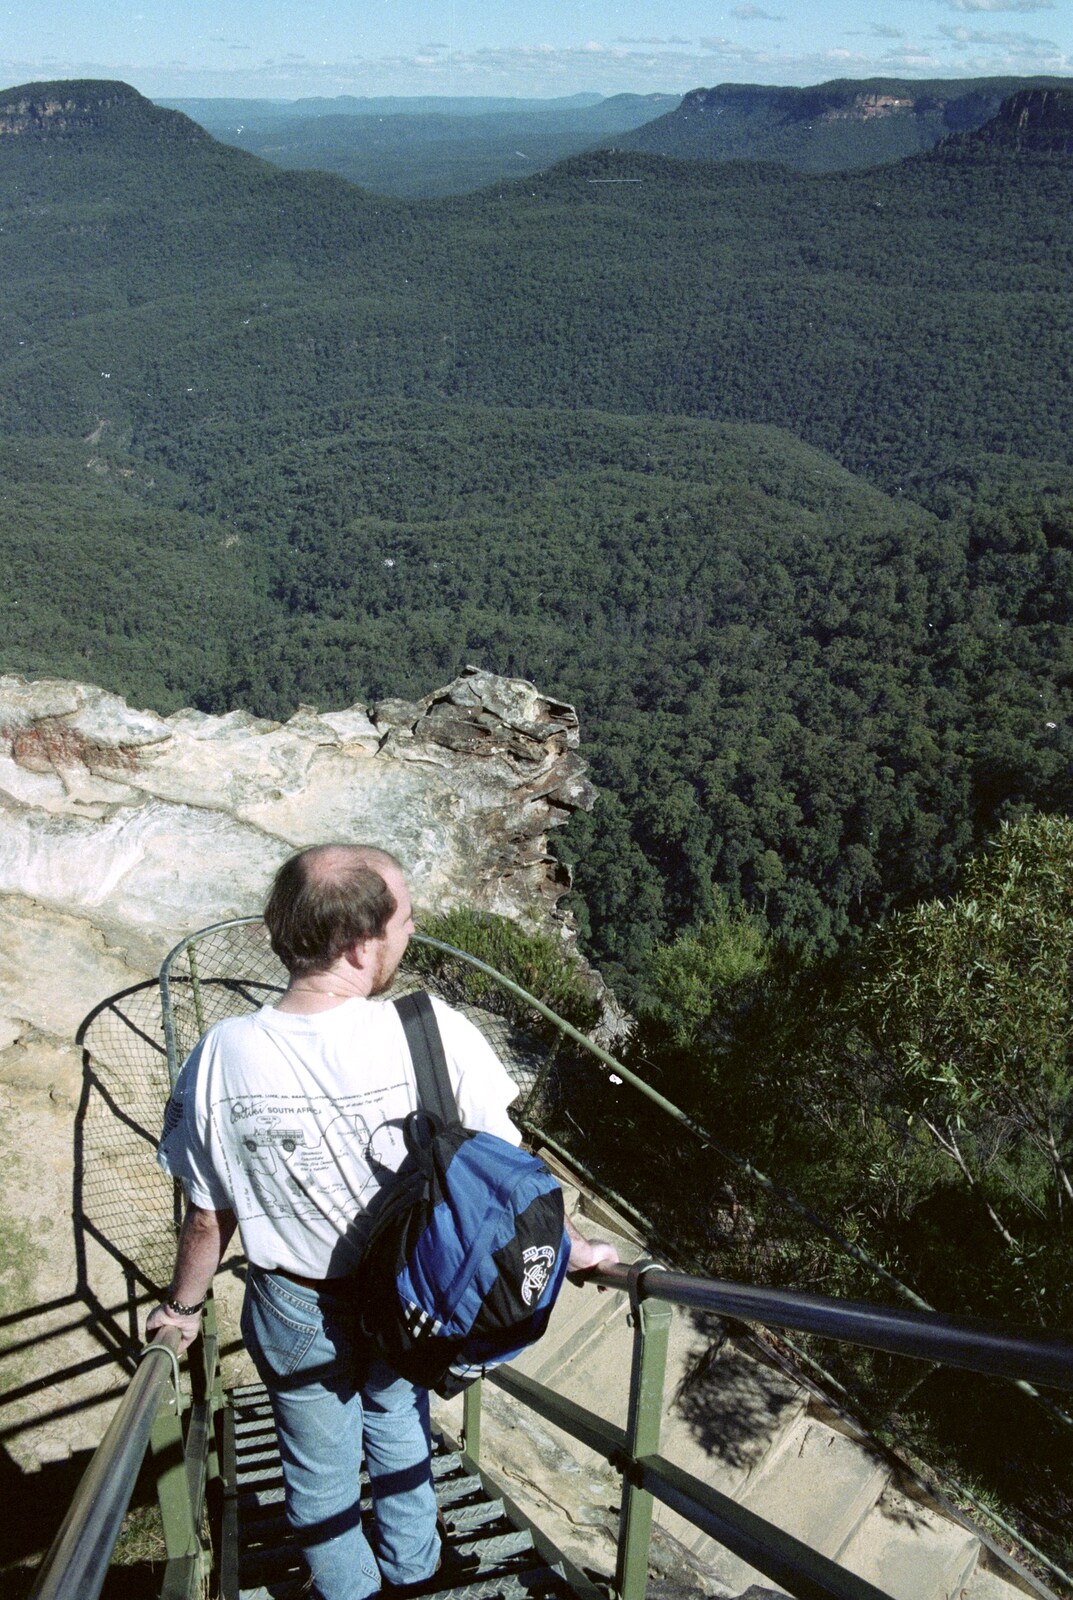 Dave looks around from A Trip to the Blue Mountains, New South Wales, Australia - 12th April 2000